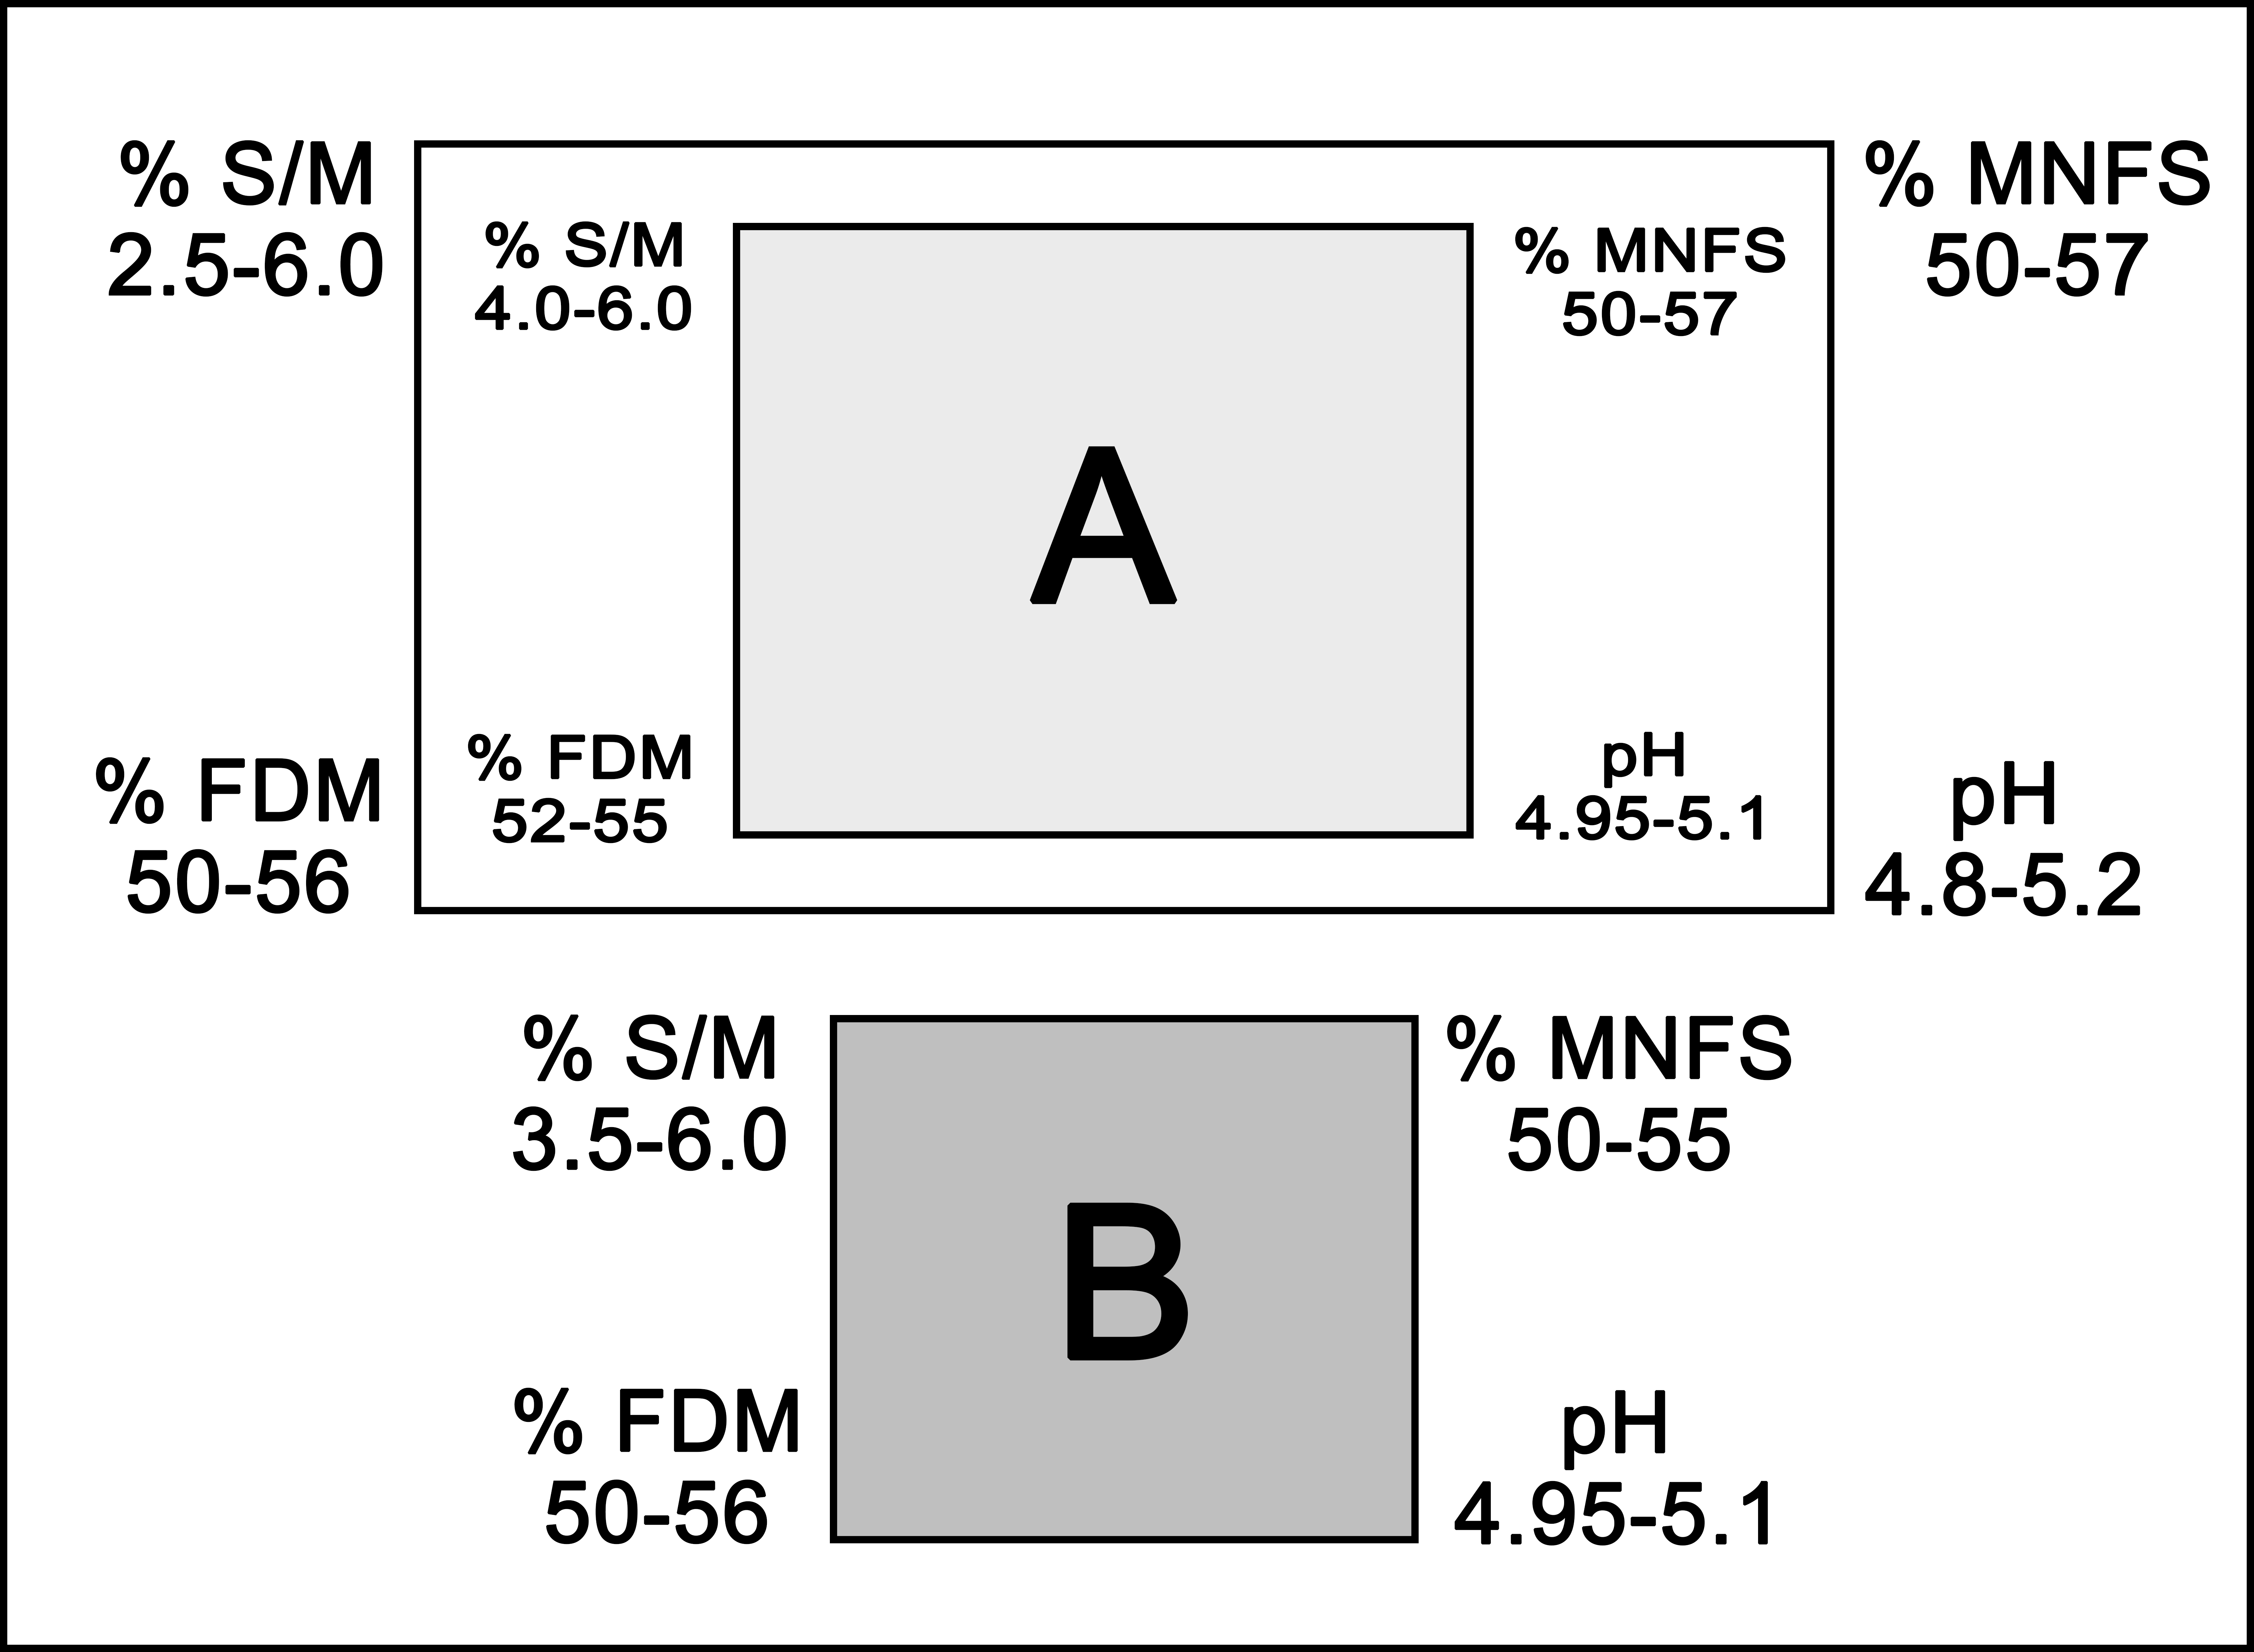 This figure shows Cheddar cheese composition for optimal curing. The optimal salt/moisture percentage is between 2.5 and 6.0. The optimal percentage of moisture in the non fat substance is between 50 and 57. The optimal percentage of fat in the dry matter is between 50 and 56. The optimal pH is between 4.8 to 5.2. New Zealand standards for Premium and First Grade Cheddar cheese has different optimal ranges. The optimal percentage of salt over moisture is between 4.0 and 6.0. The optimal percentage of moisture in the non fat substance is between 50 and 57. The optimal percentage of fat in the dry matter is between 52 and 55. The optimal pH is between 4.95 and 5.1. The typical ranges for high quality Canadian Cheddar also differs. The typical salt over moisture percentage is between 3.5 and 6.0. The typical percentage of moisture in the non fat substance is between 50 and 55. The typical percentage fat in the dry matter is between 50 and 56. The typical pH is between 4.95 and 5.1.